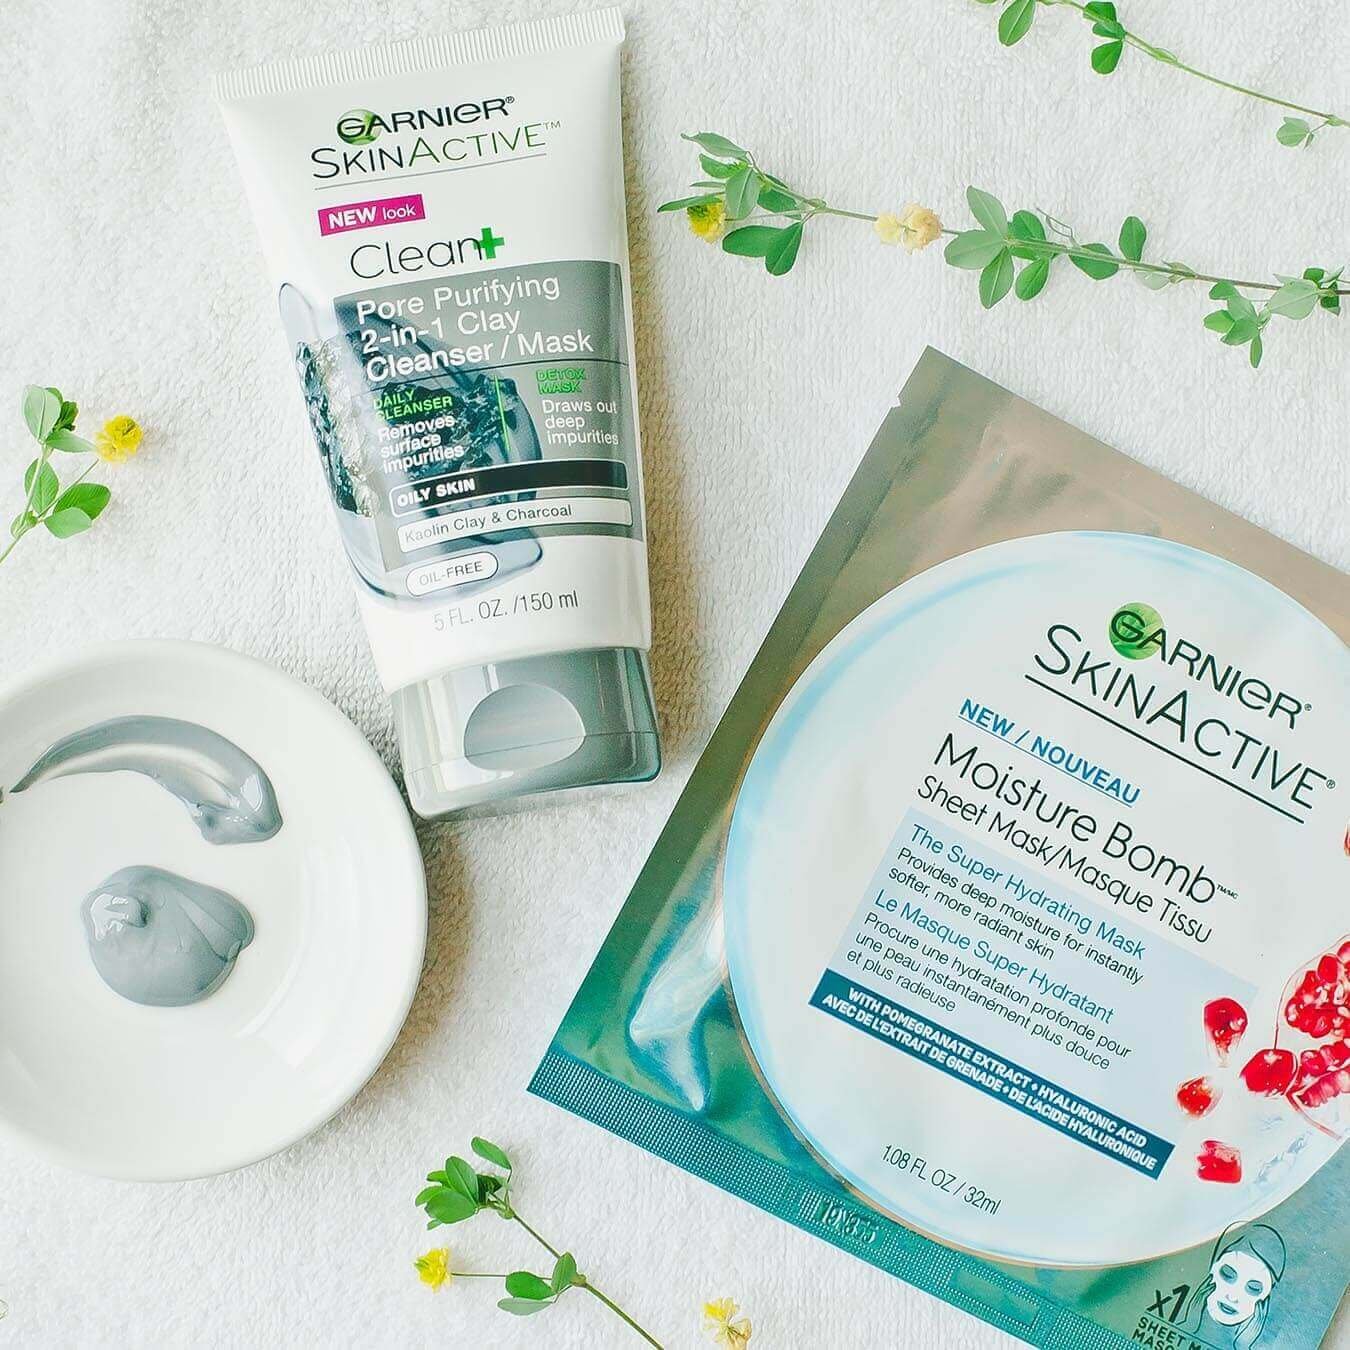 Garnier SkinActive Moisture Bomb Sheet Mask with Pomegranate Extract next to SkinActive Clean+ Pore Purifying 2-in-1 Clay Cleanser/Mask and a white dish with some cleanser/mask squeezed from the tube and smeared in an arc on a white towel strewn with yellow wildflowers.